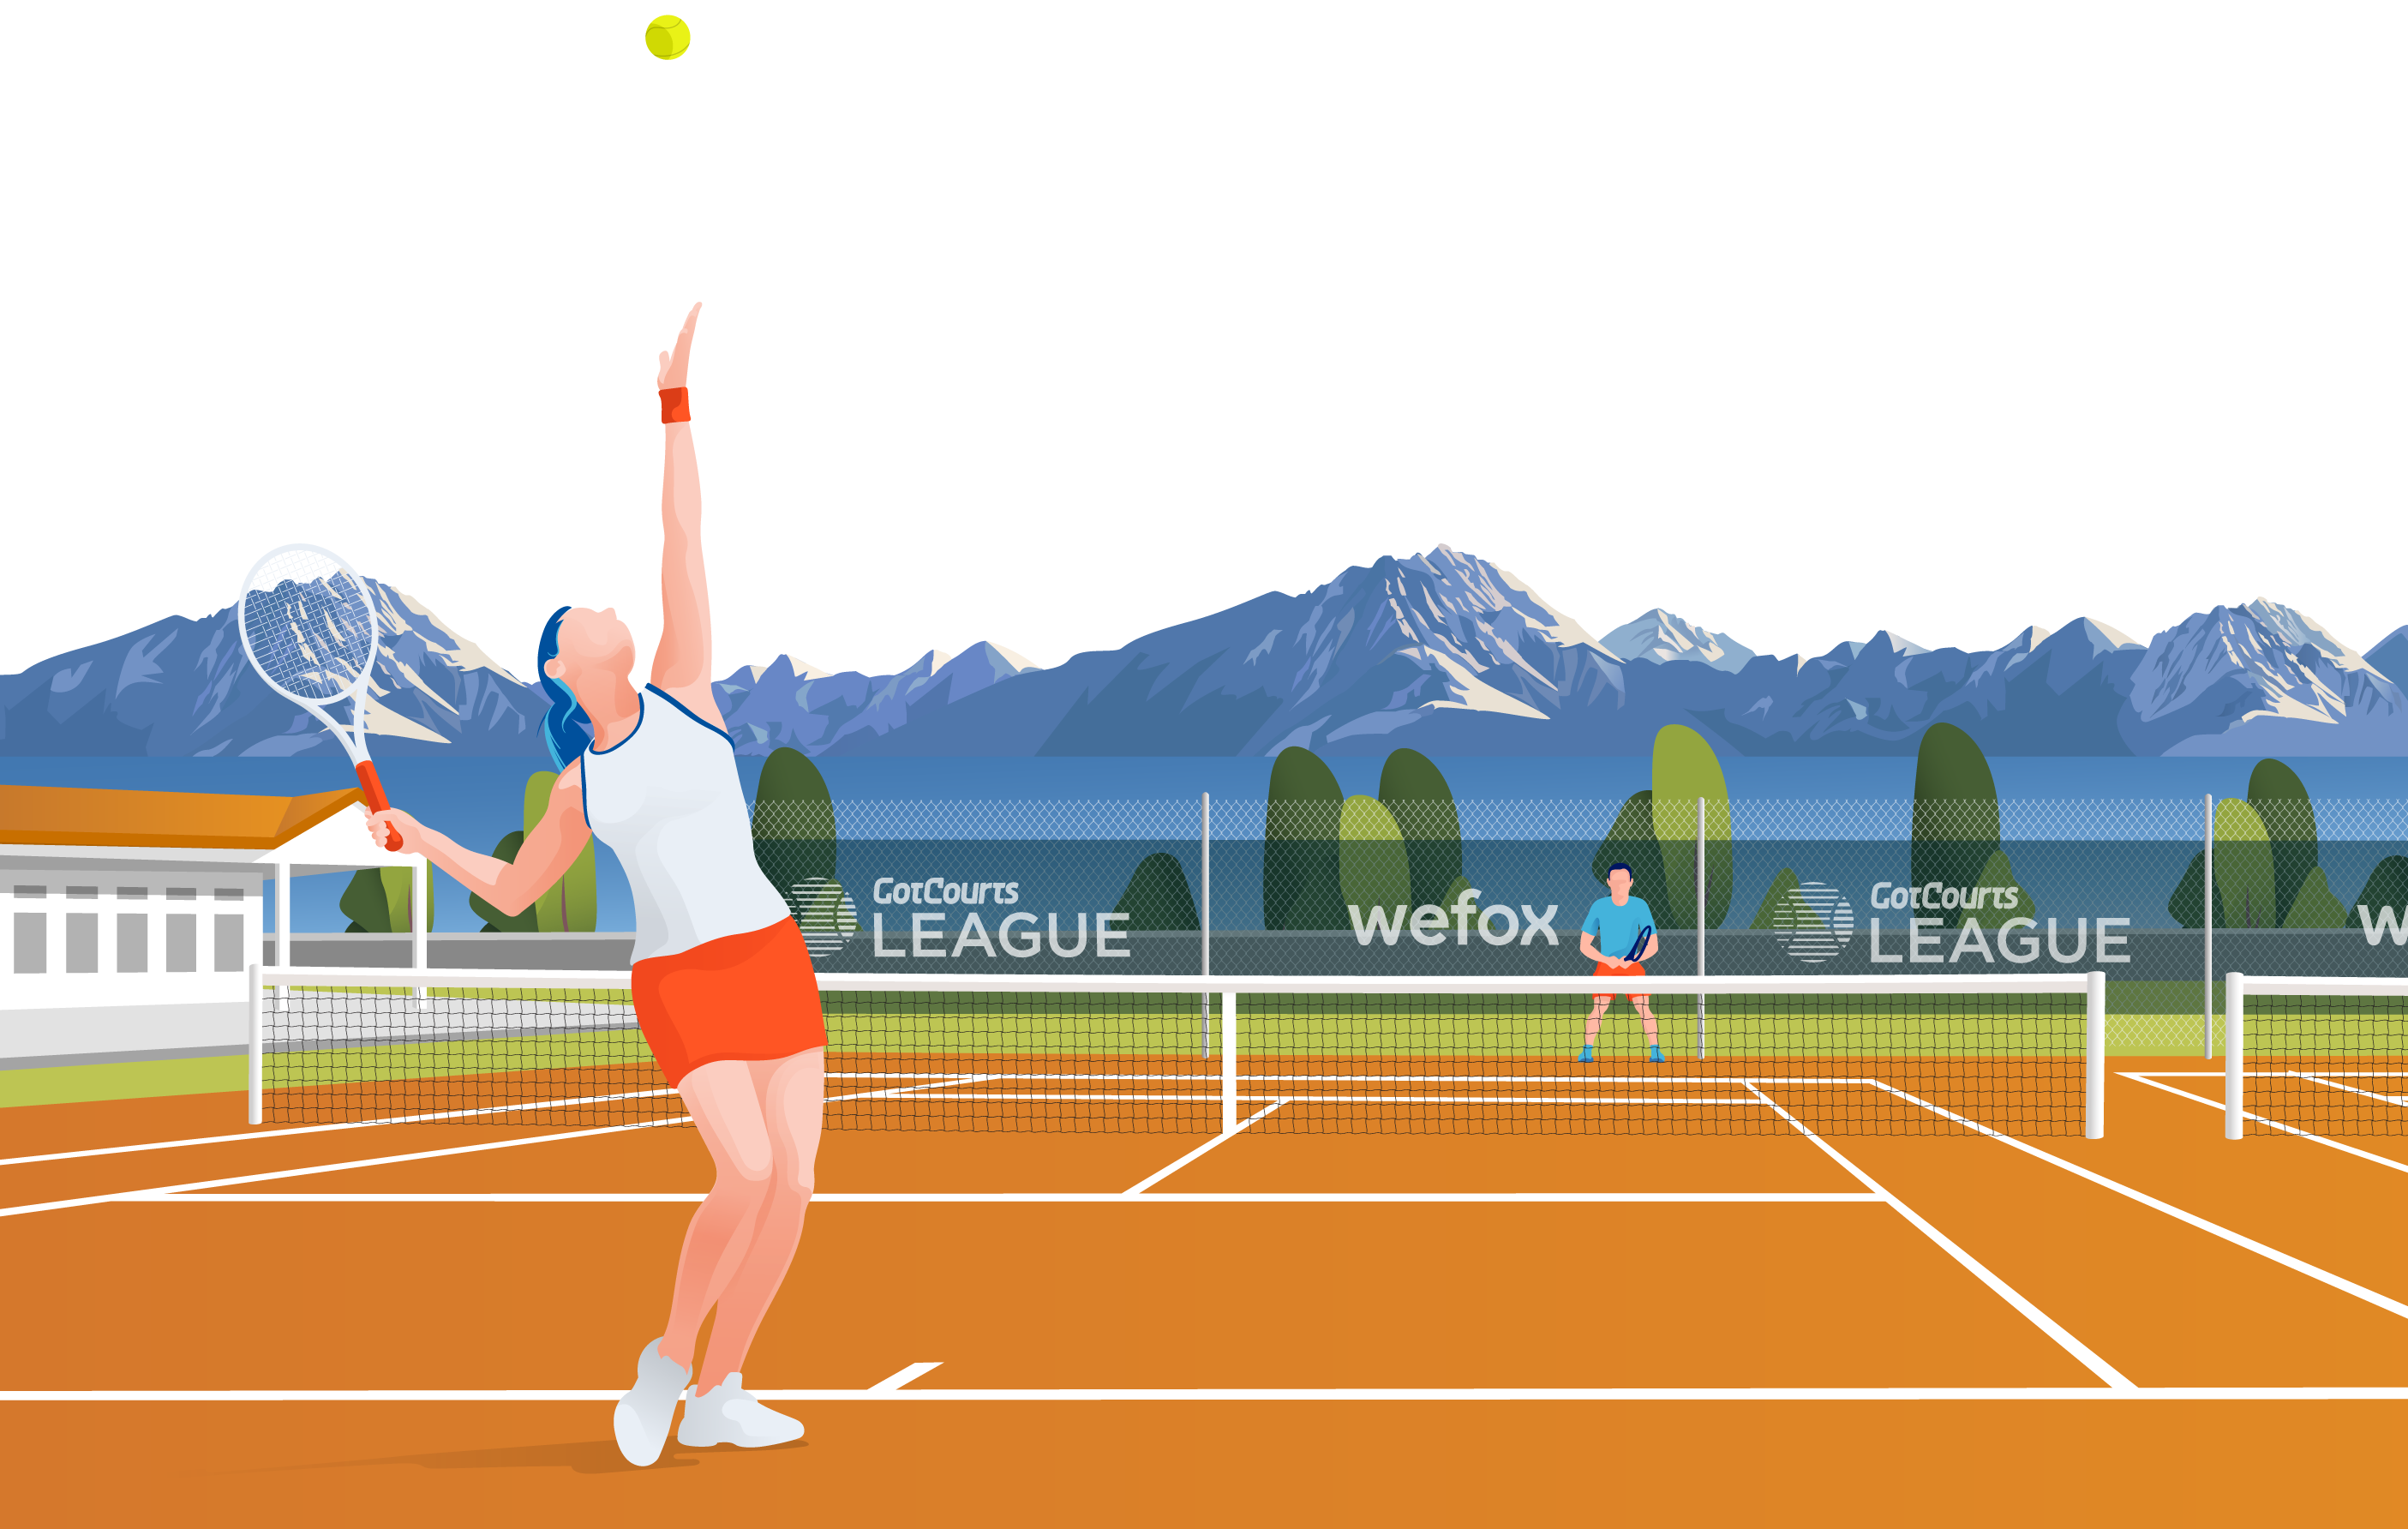 Illustration of tennis player serving with mountains background